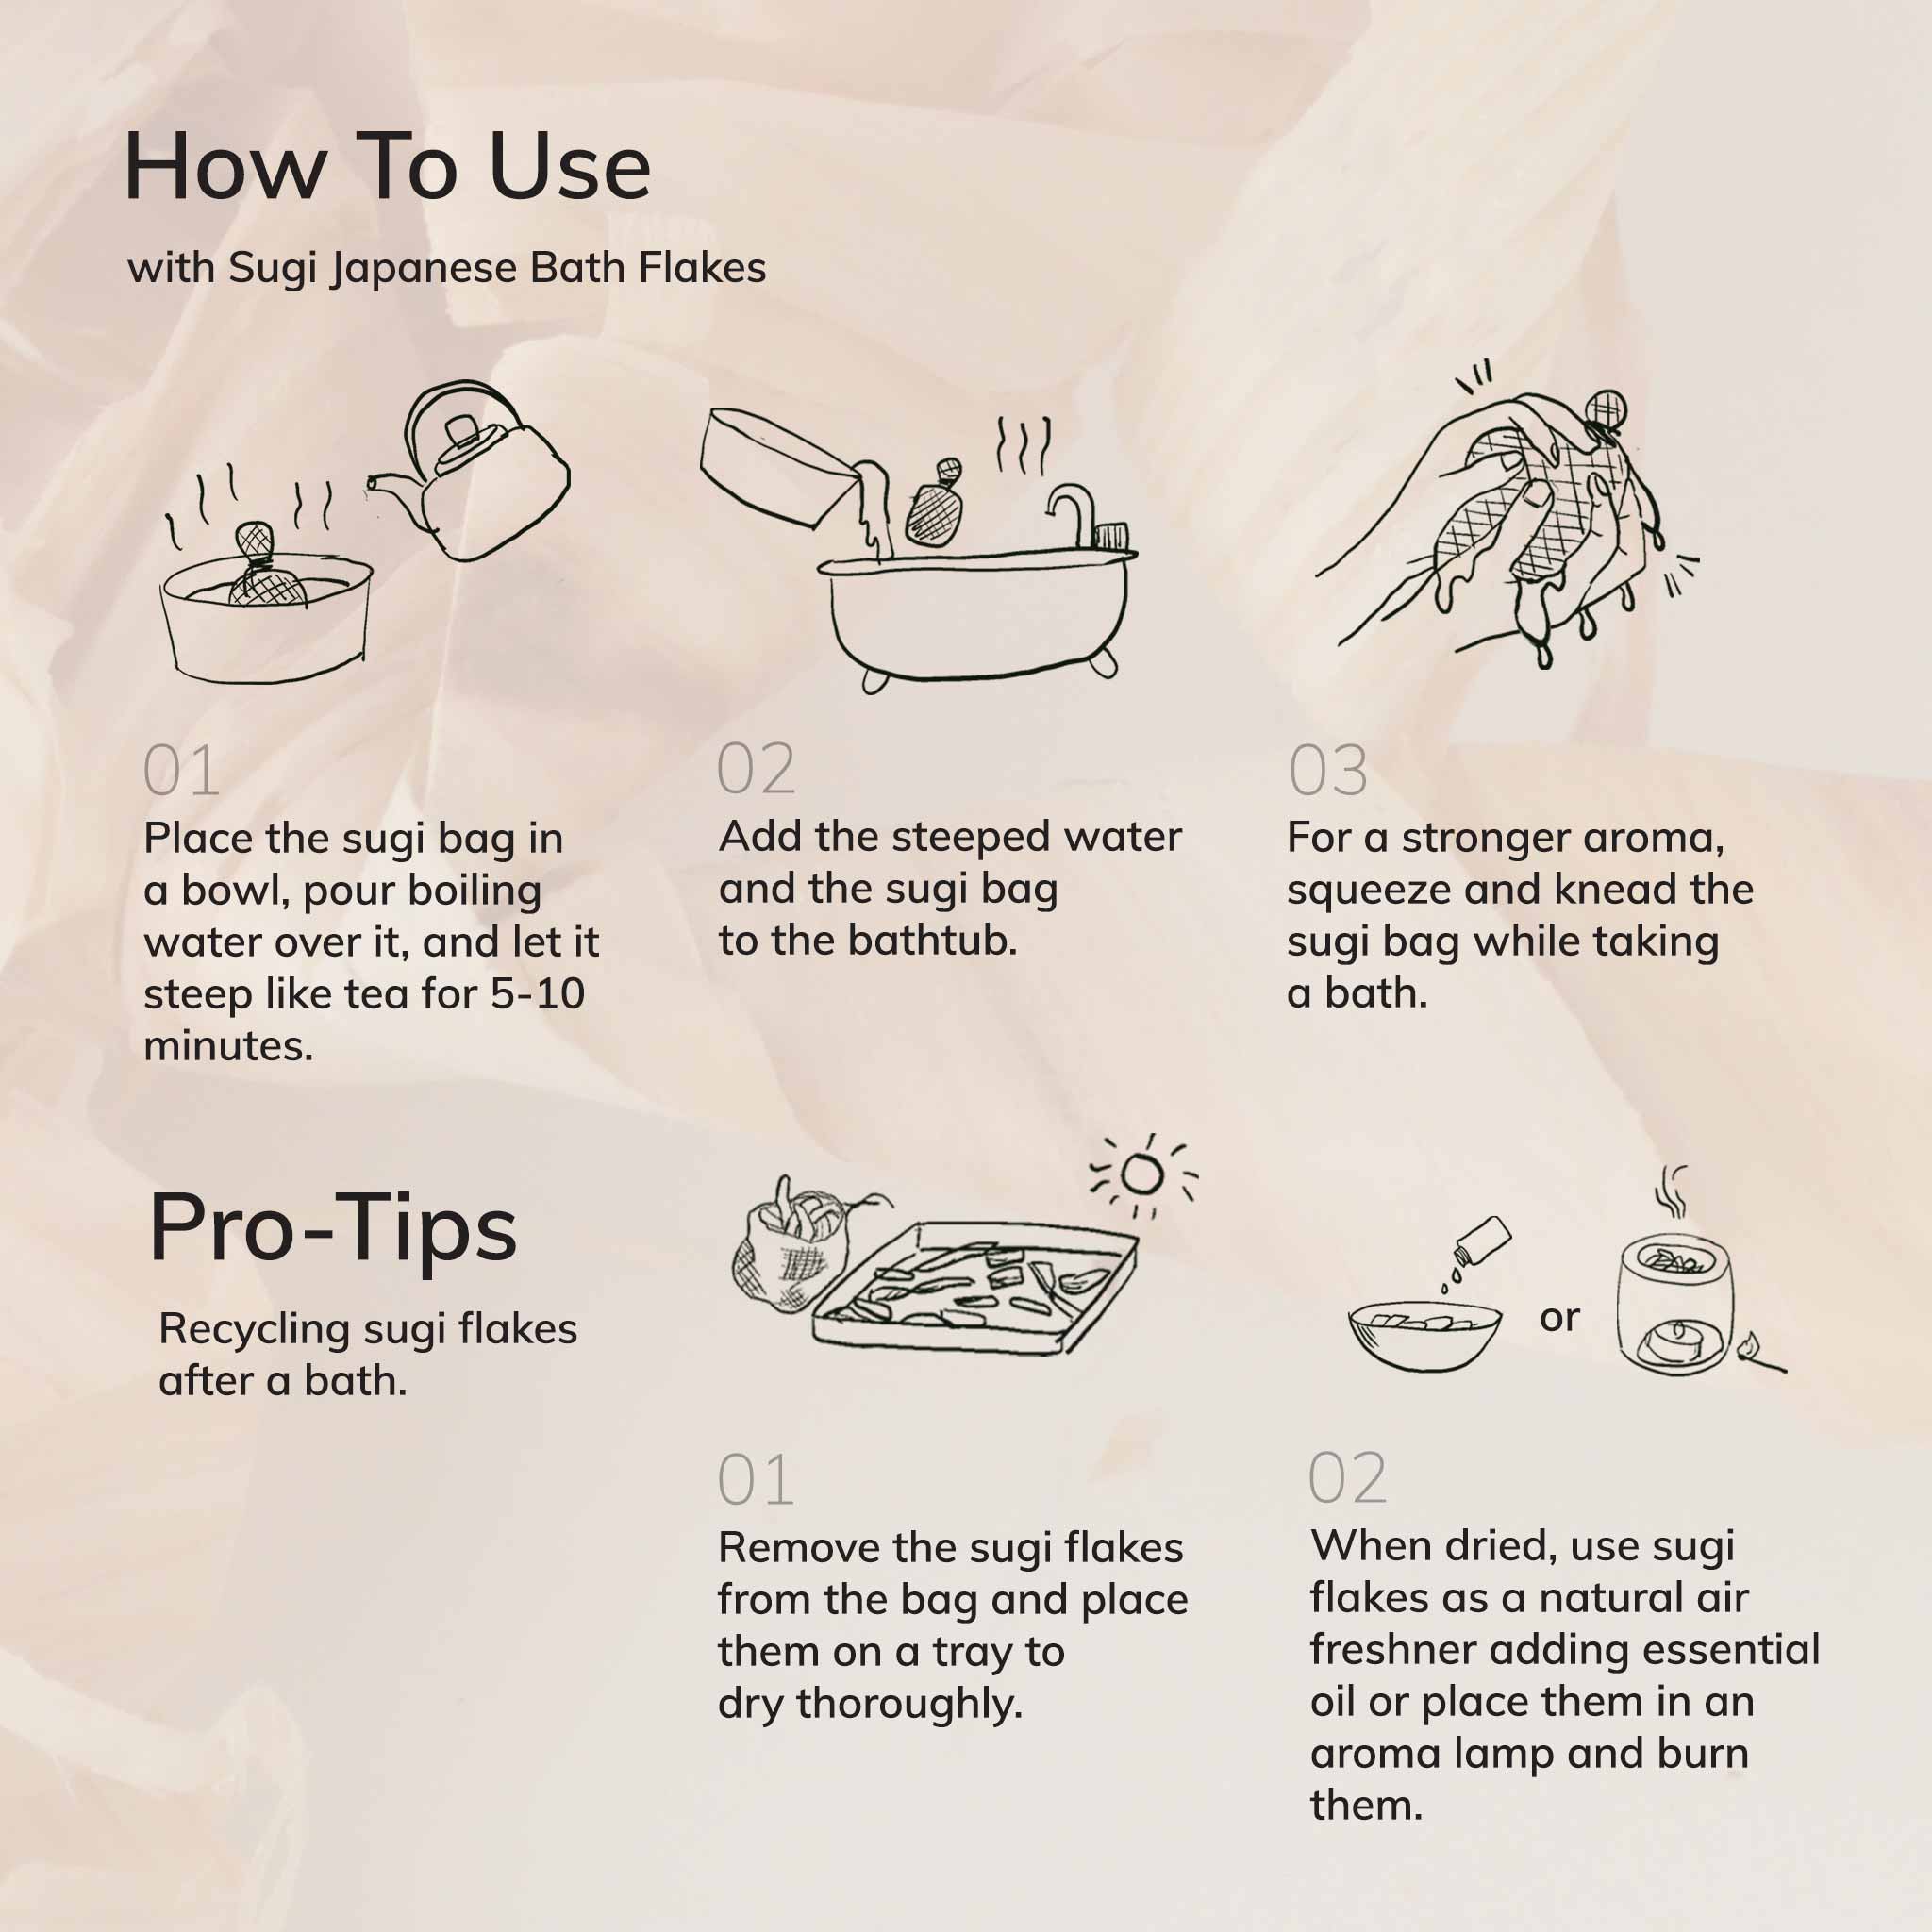 bath instructions and pro-tips for sugi Japanese bath flakes